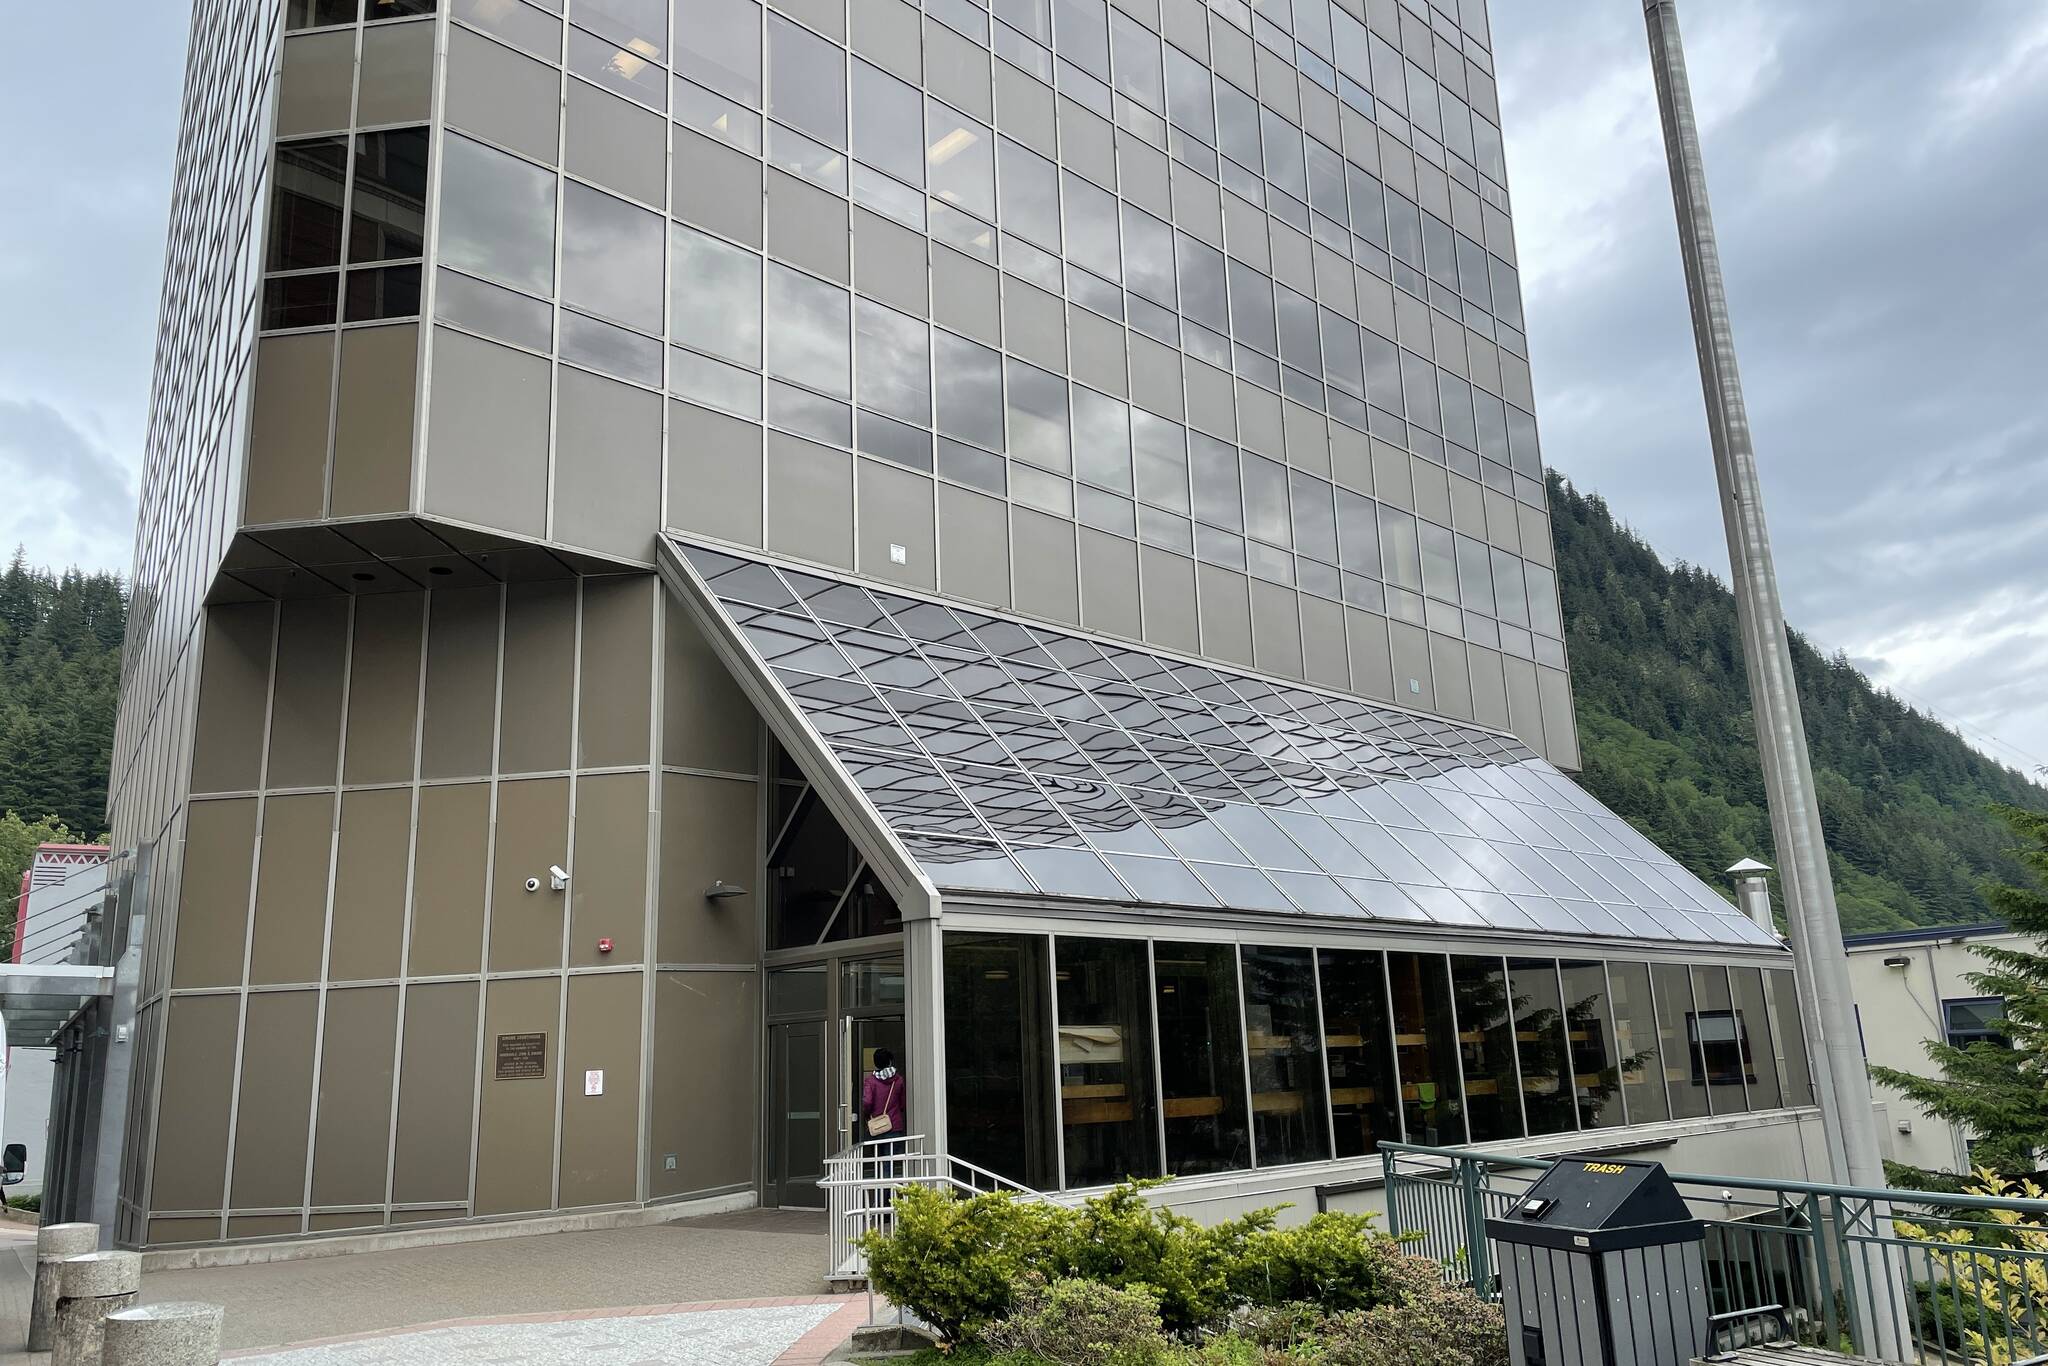 A Juneau man was sentenced to more than a decade imprisonment for sexual abuse of a minor at Dimond Courthouse on Tuesday, June 7, 2022. (Michael S. Lockett / Juneau Empire)